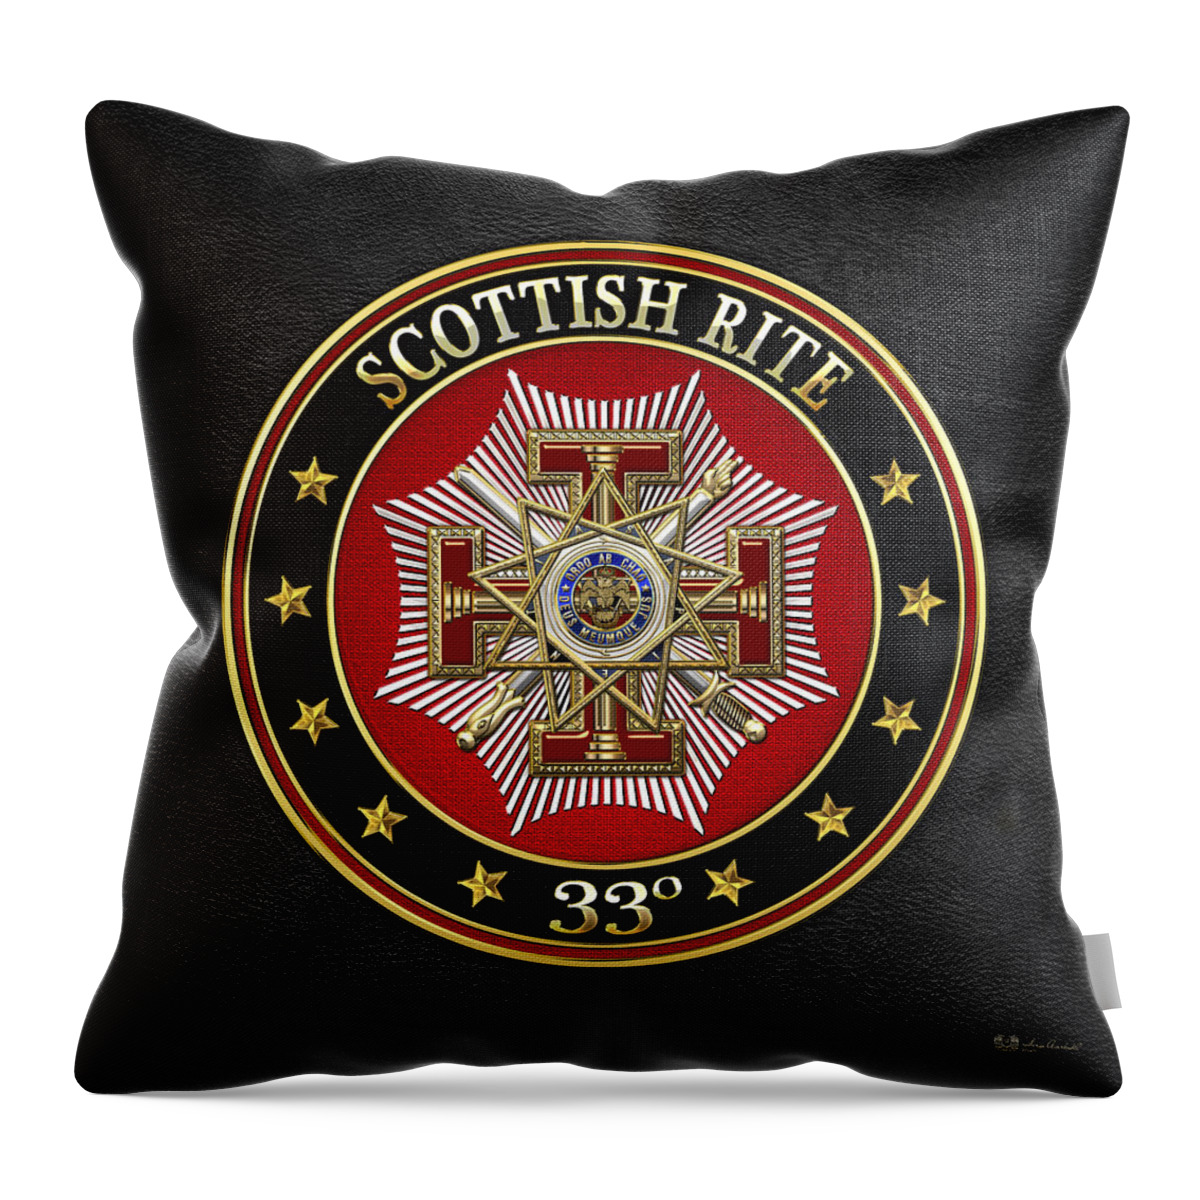 'scottish Rite' Collection By Serge Averbukh Throw Pillow featuring the digital art 33rd Degree - Inspector General Jewel on Black Leather by Serge Averbukh